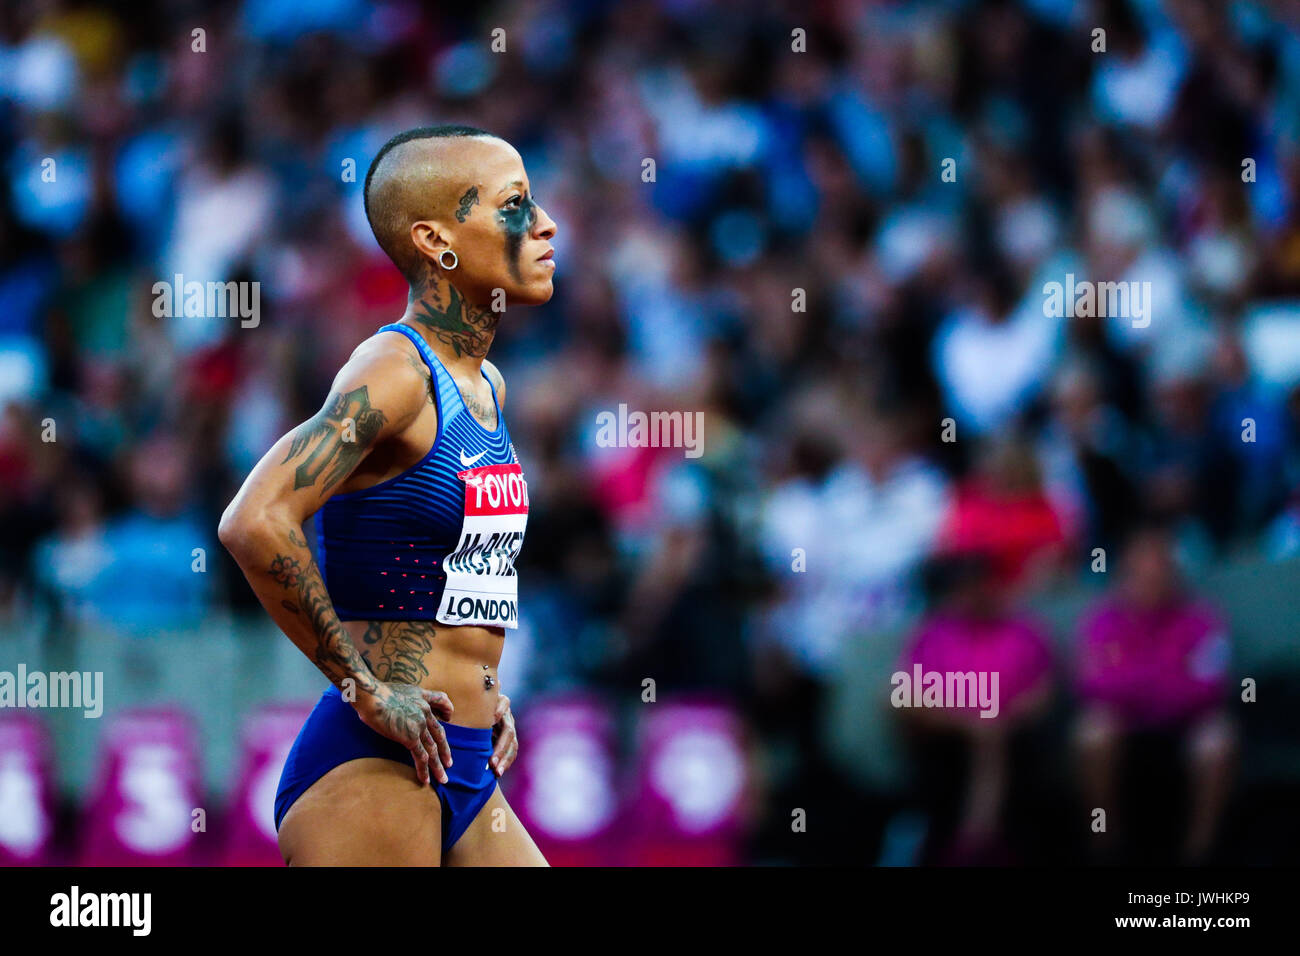 London, UK. 12th Aug, 2017.  Inika McPherson, USA, in the women's high jump final on day nine of the IAAF London 2017 world Championships at the London Stadium. Credit: Paul Davey/Alamy Live News Stock Photo